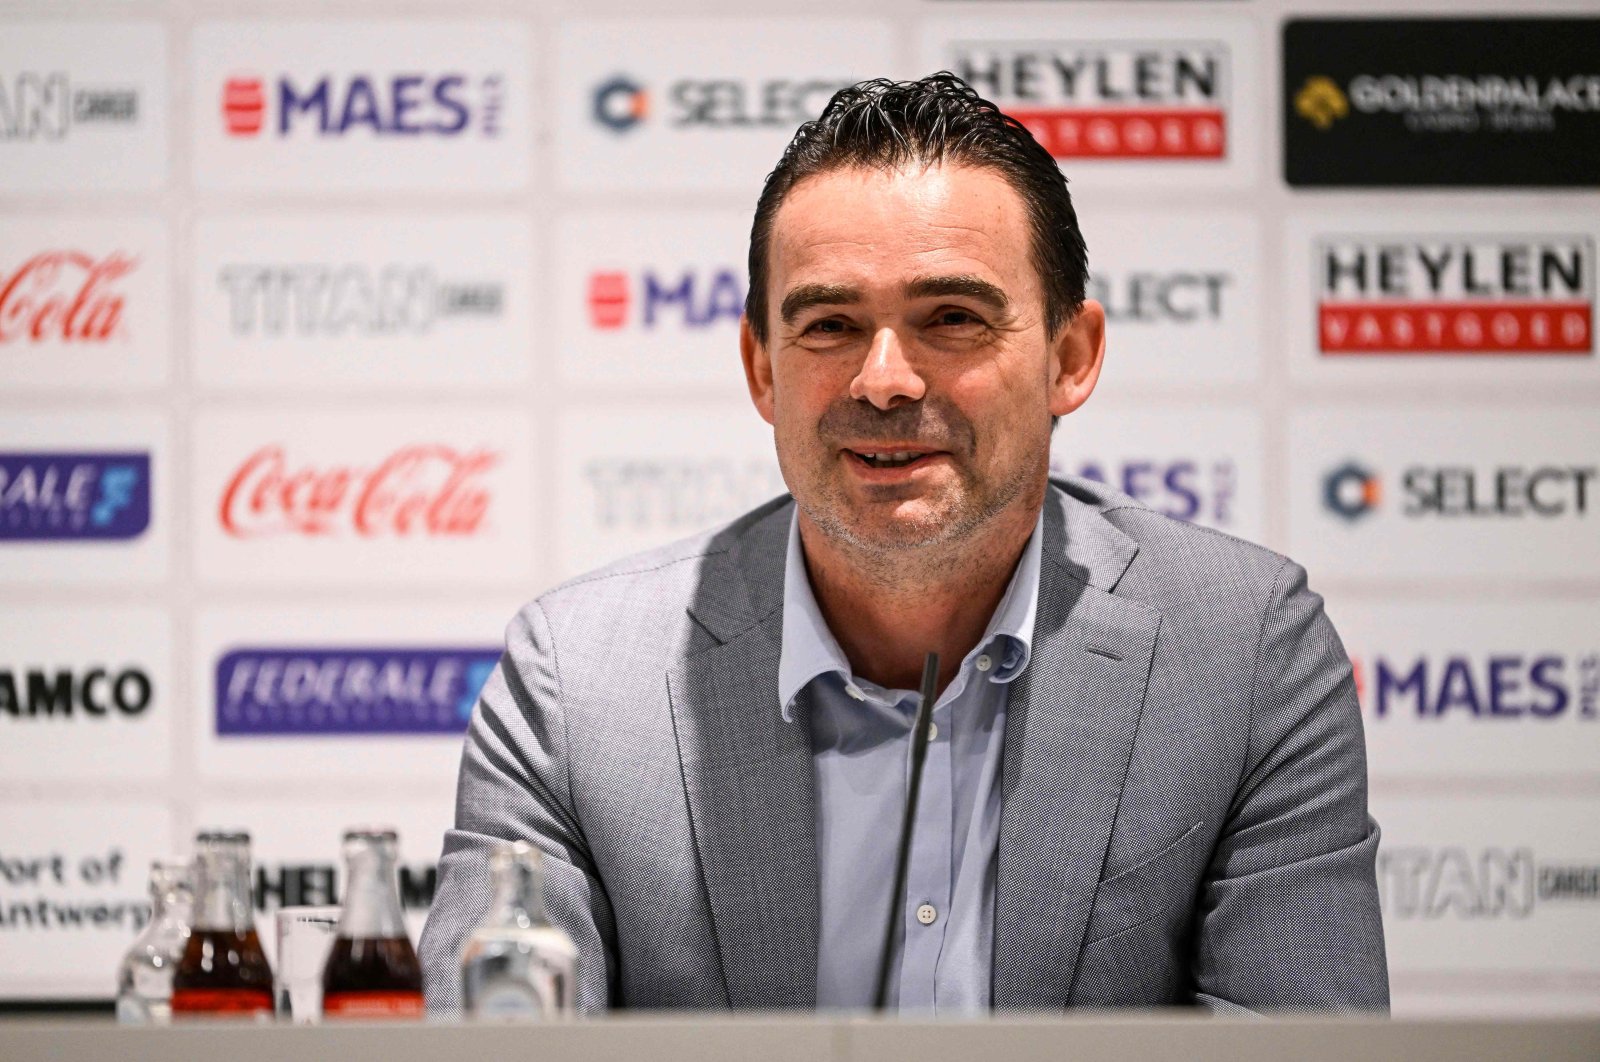 Royal Antwerp&#039;s new football director Marc Overmars at a press conference, Antwerp, Belgium, March 21, 2022. (AFP Photo)